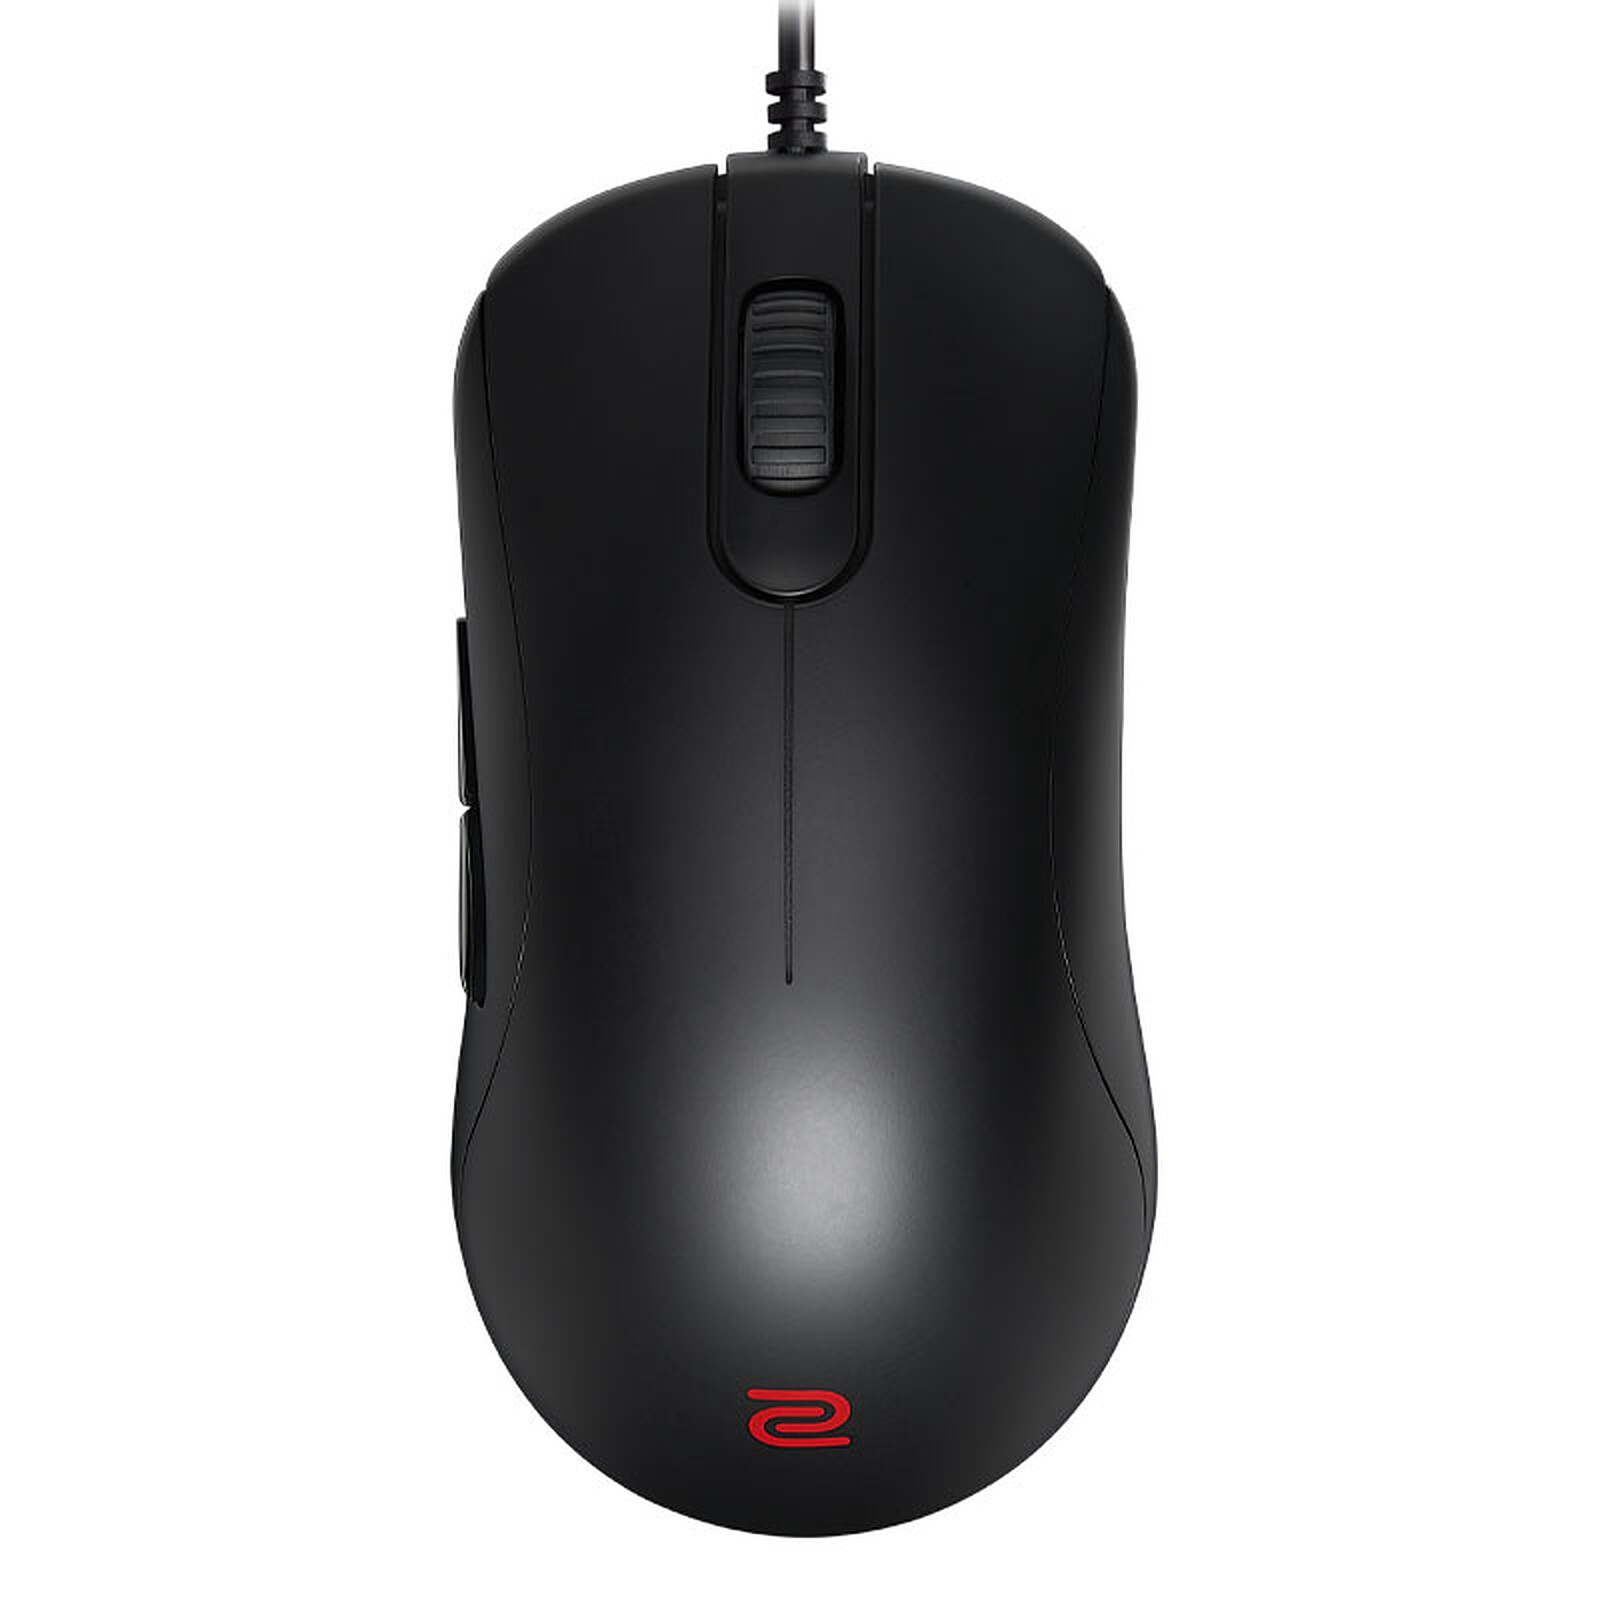 BenQ Zowie ZA13-B Black - Mouse BenQ Zowie on LDLC | Holy Moley